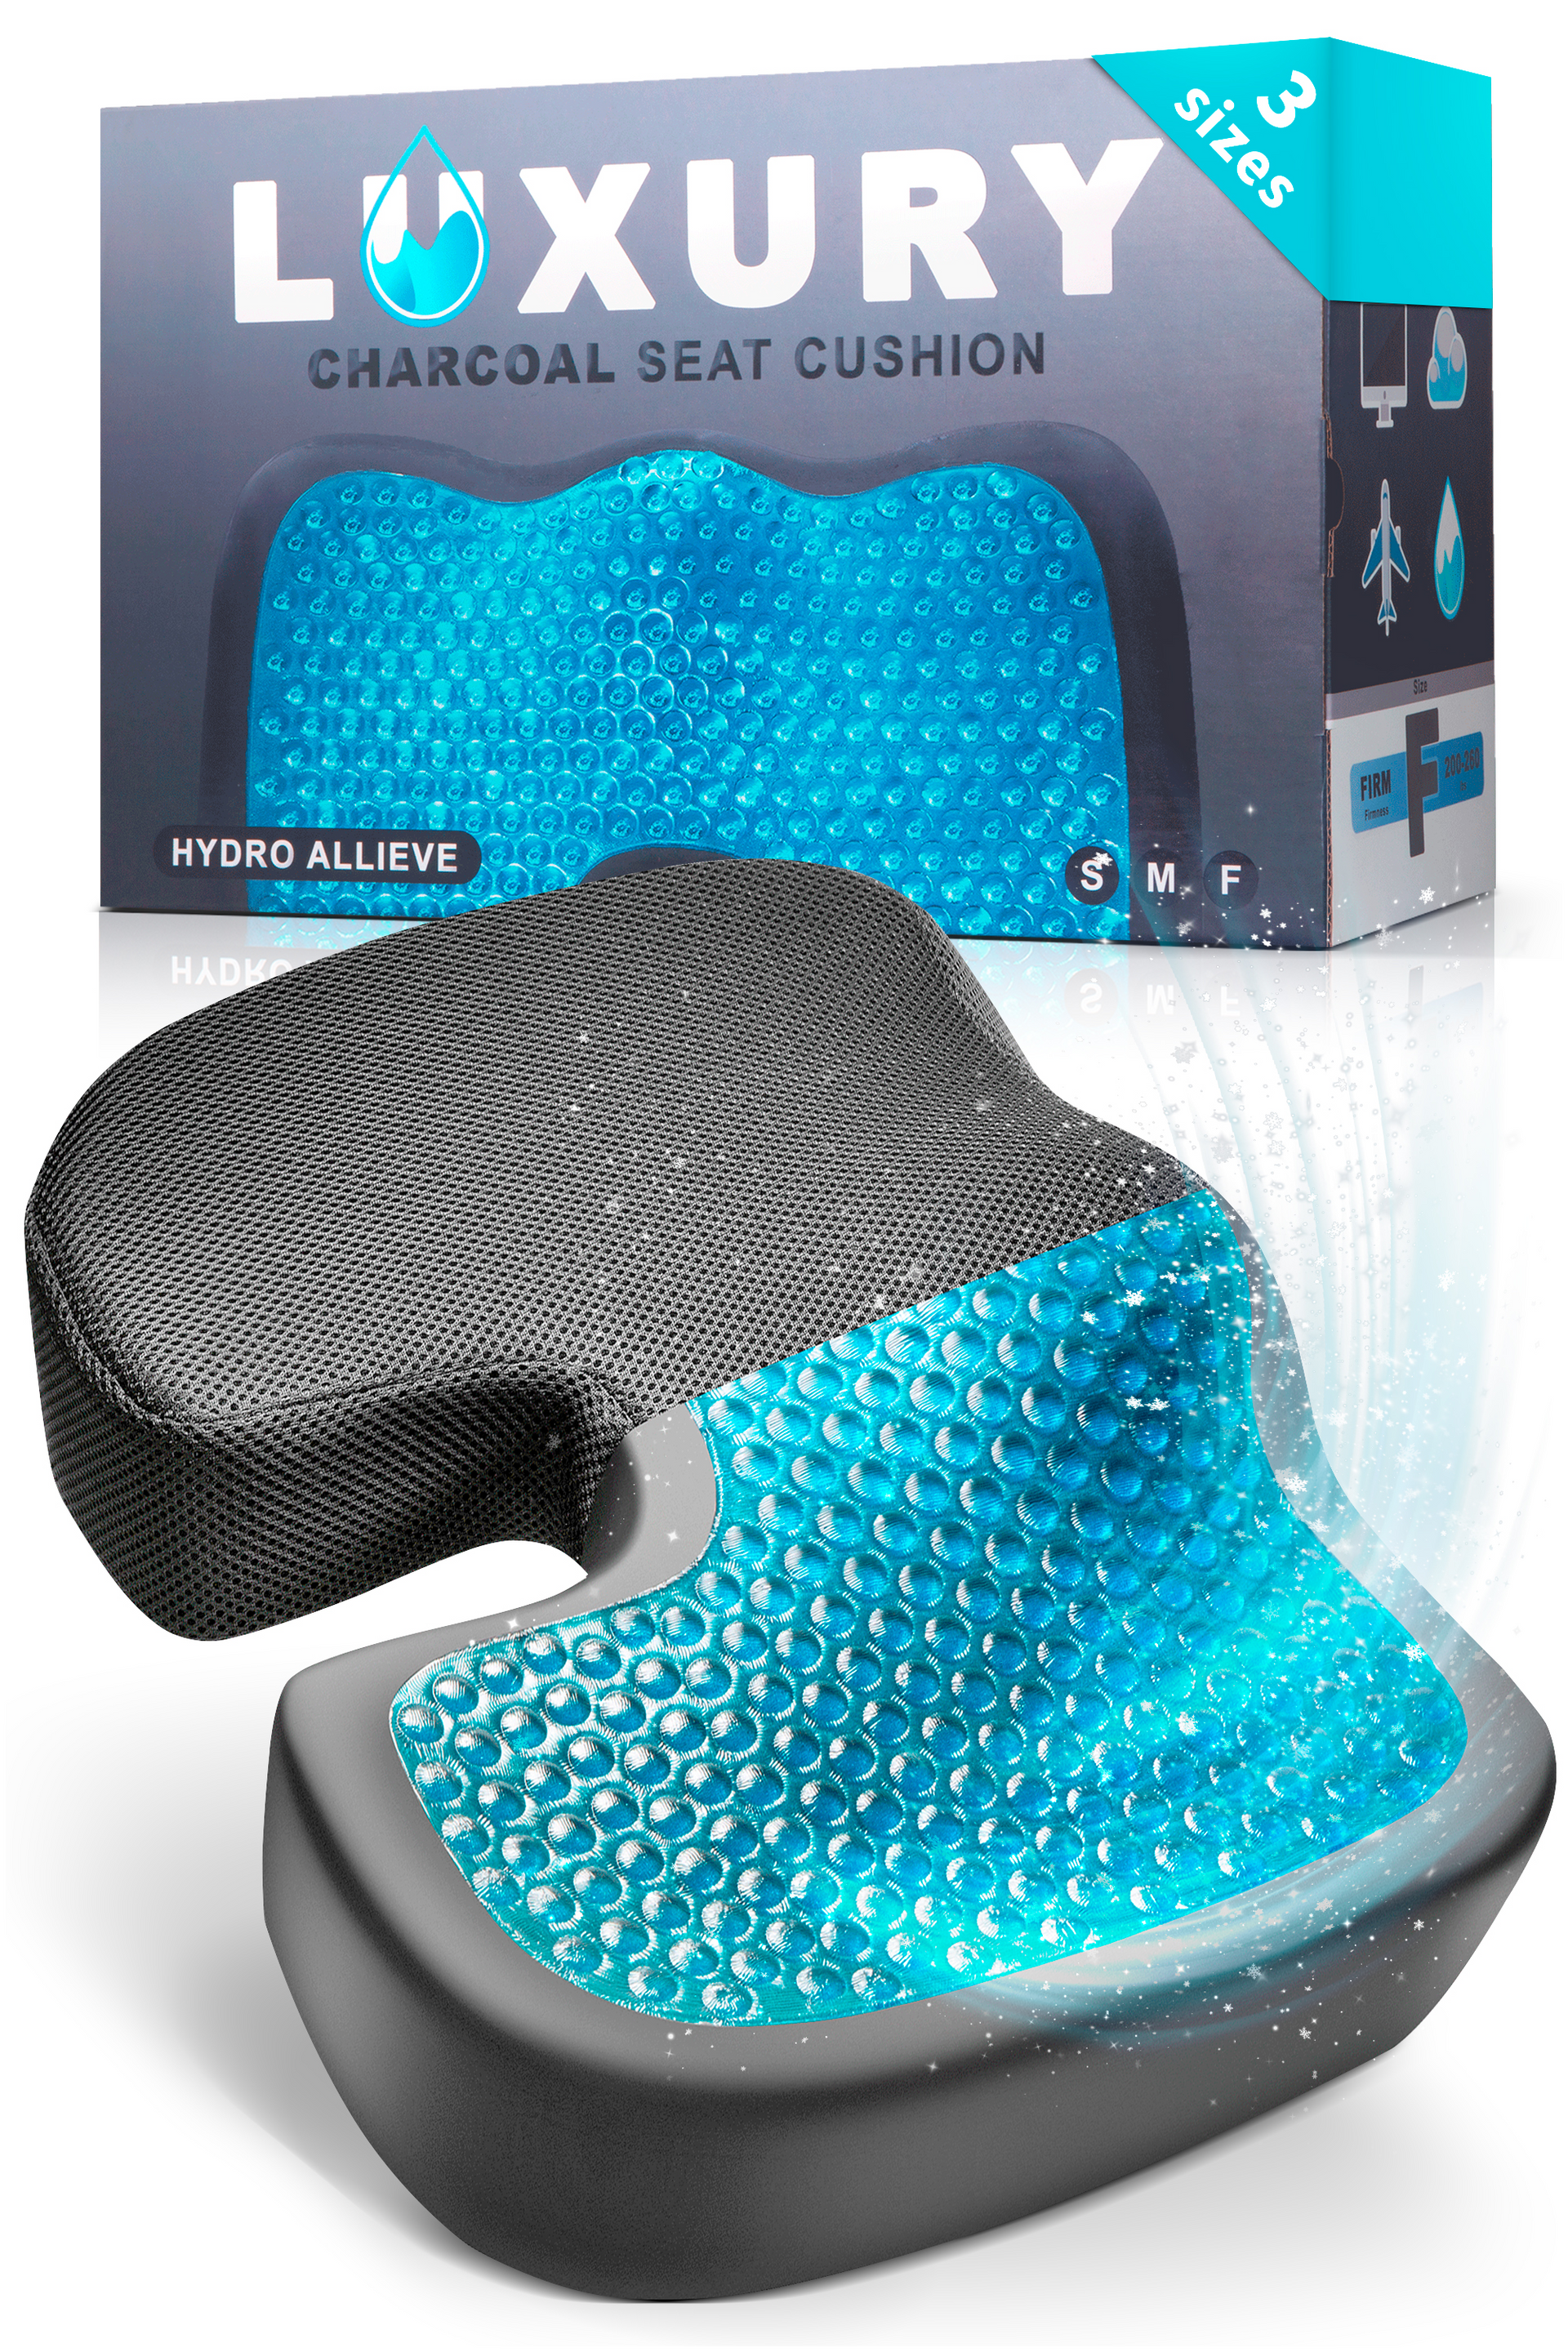 Harlov Memory Foam Seat/Chair Cushion with Cooling Gel Technology ~ ON